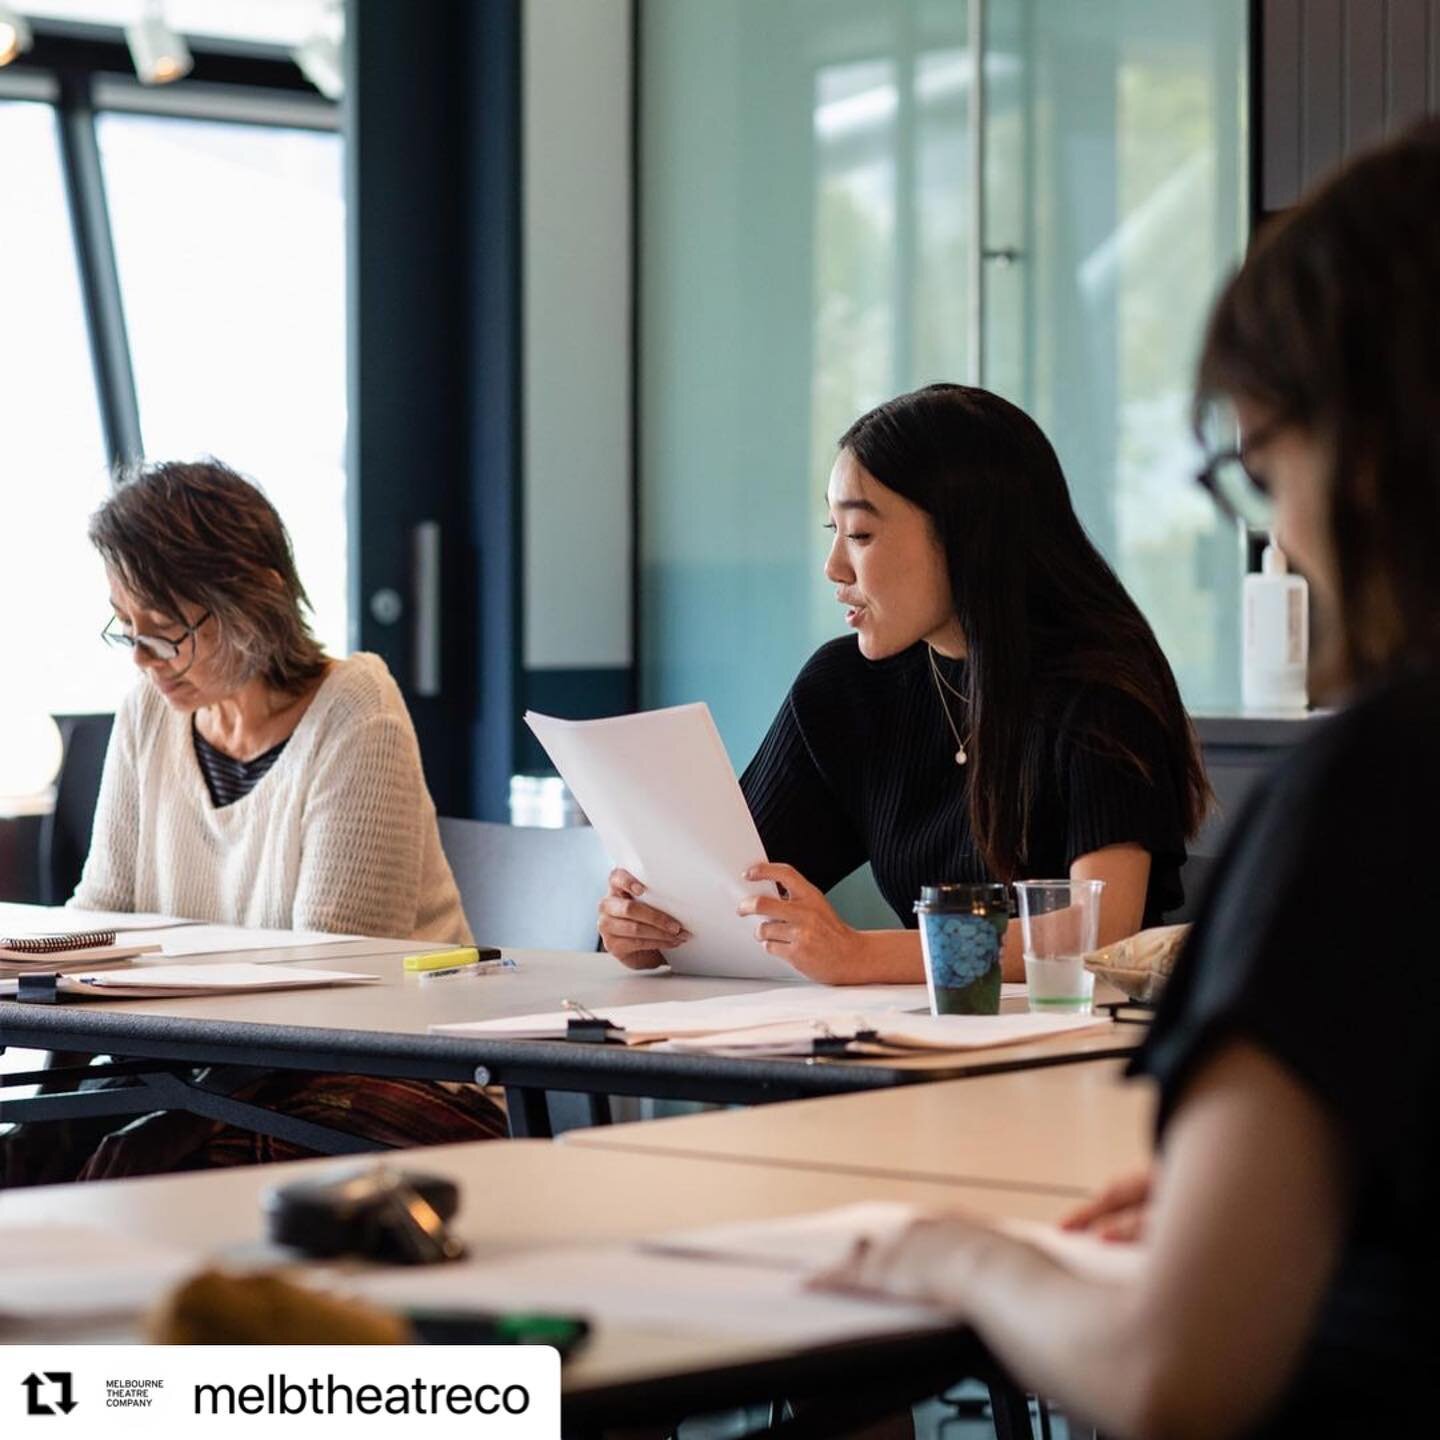 Cybec IS happening this Friday &amp; Saturday in a real live theatre! 
Such fun working with such a wonderful bunch of humans!

#Repost @melbtheatreco with @make_repost
・・・
With stage four restrictions ending tonight, we&rsquo;re excited to be able t